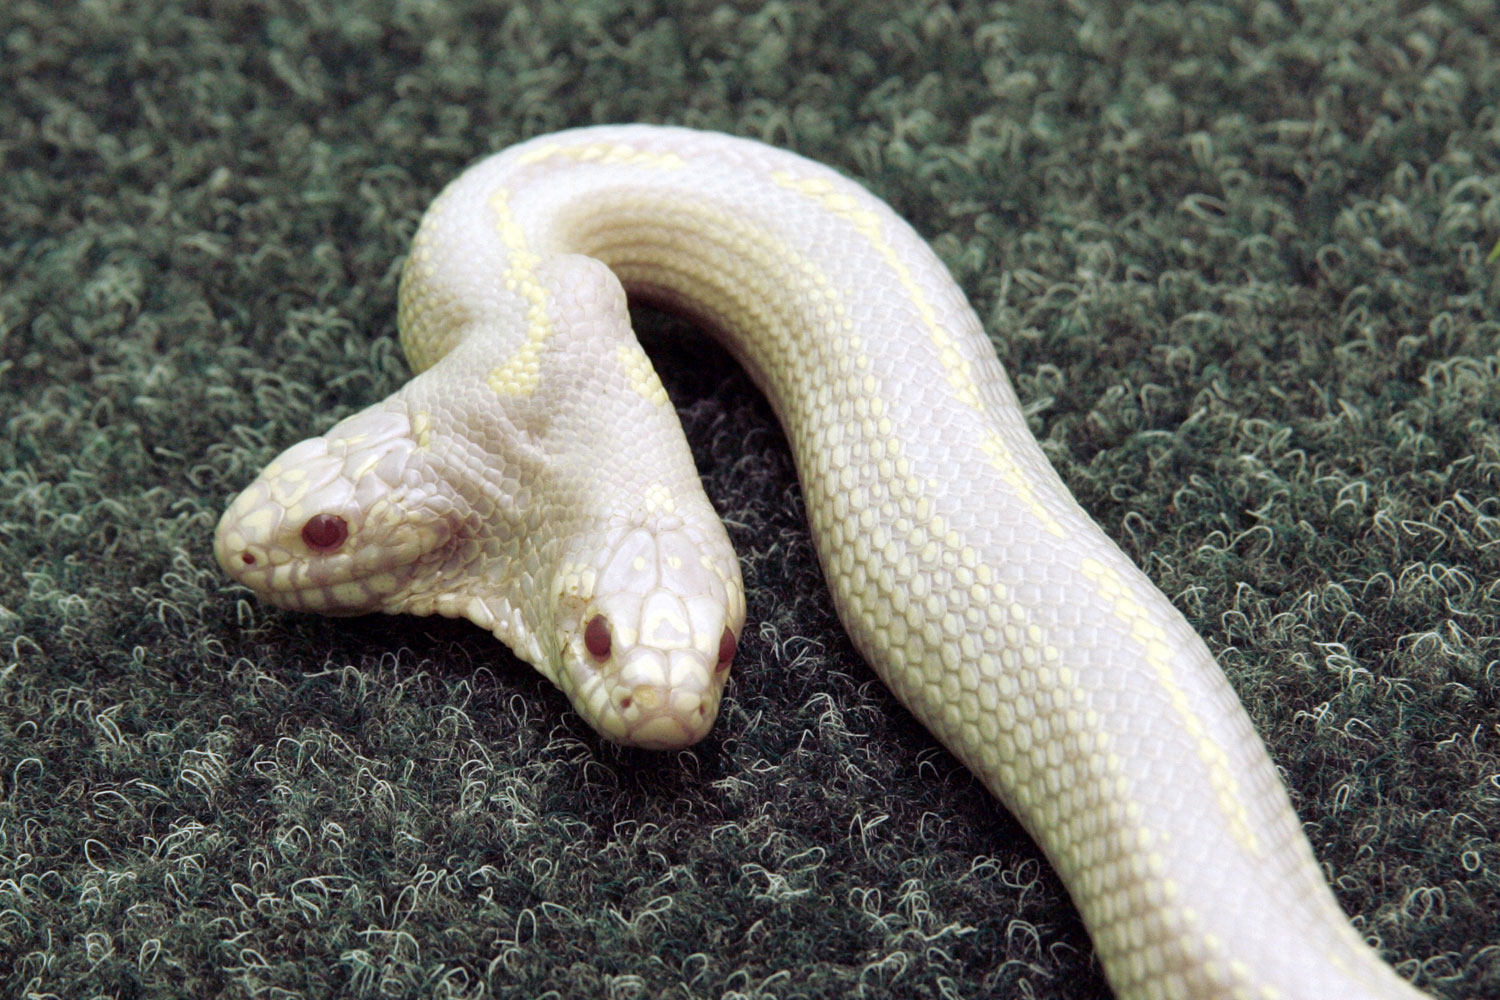 The 3-year-old two-headed royal albino python displayed at Skazka Zoo in Yalta city, July 11, 2011. It has been borrowed from Germany for a tourist season.